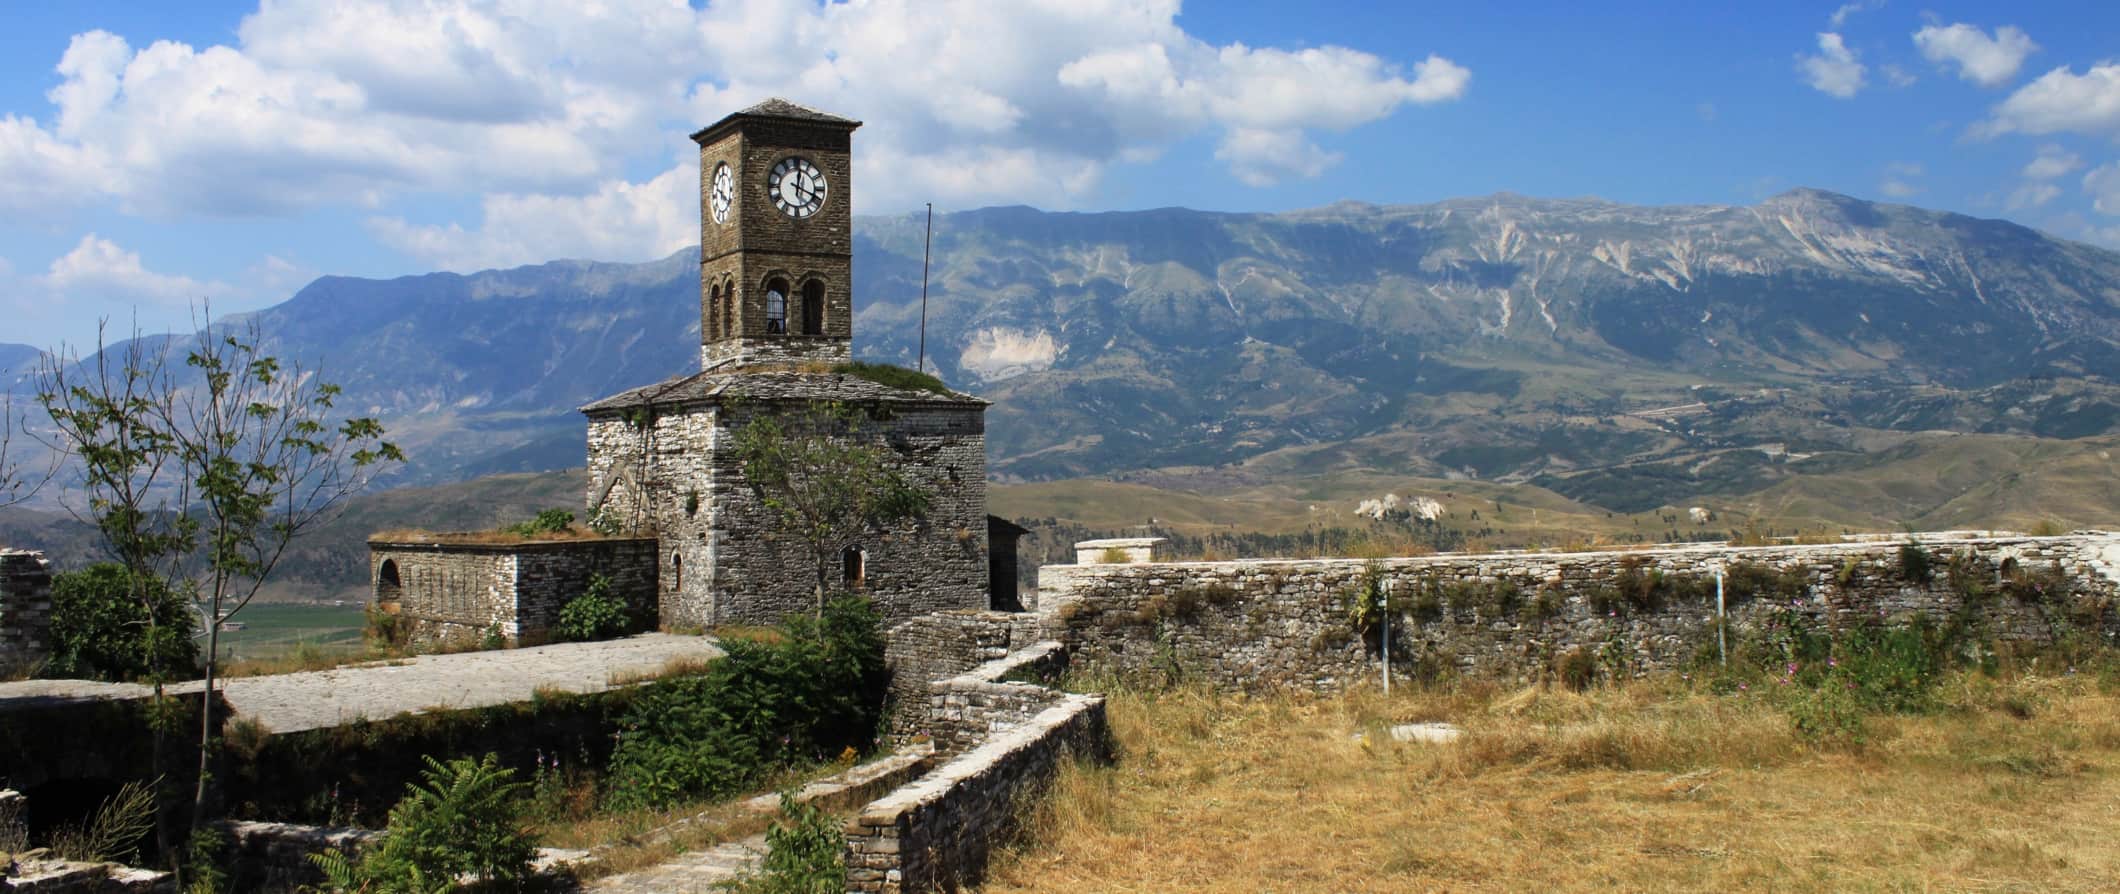 An old stone tower and stone wall in Albania with rolling hills and mountains in the distance